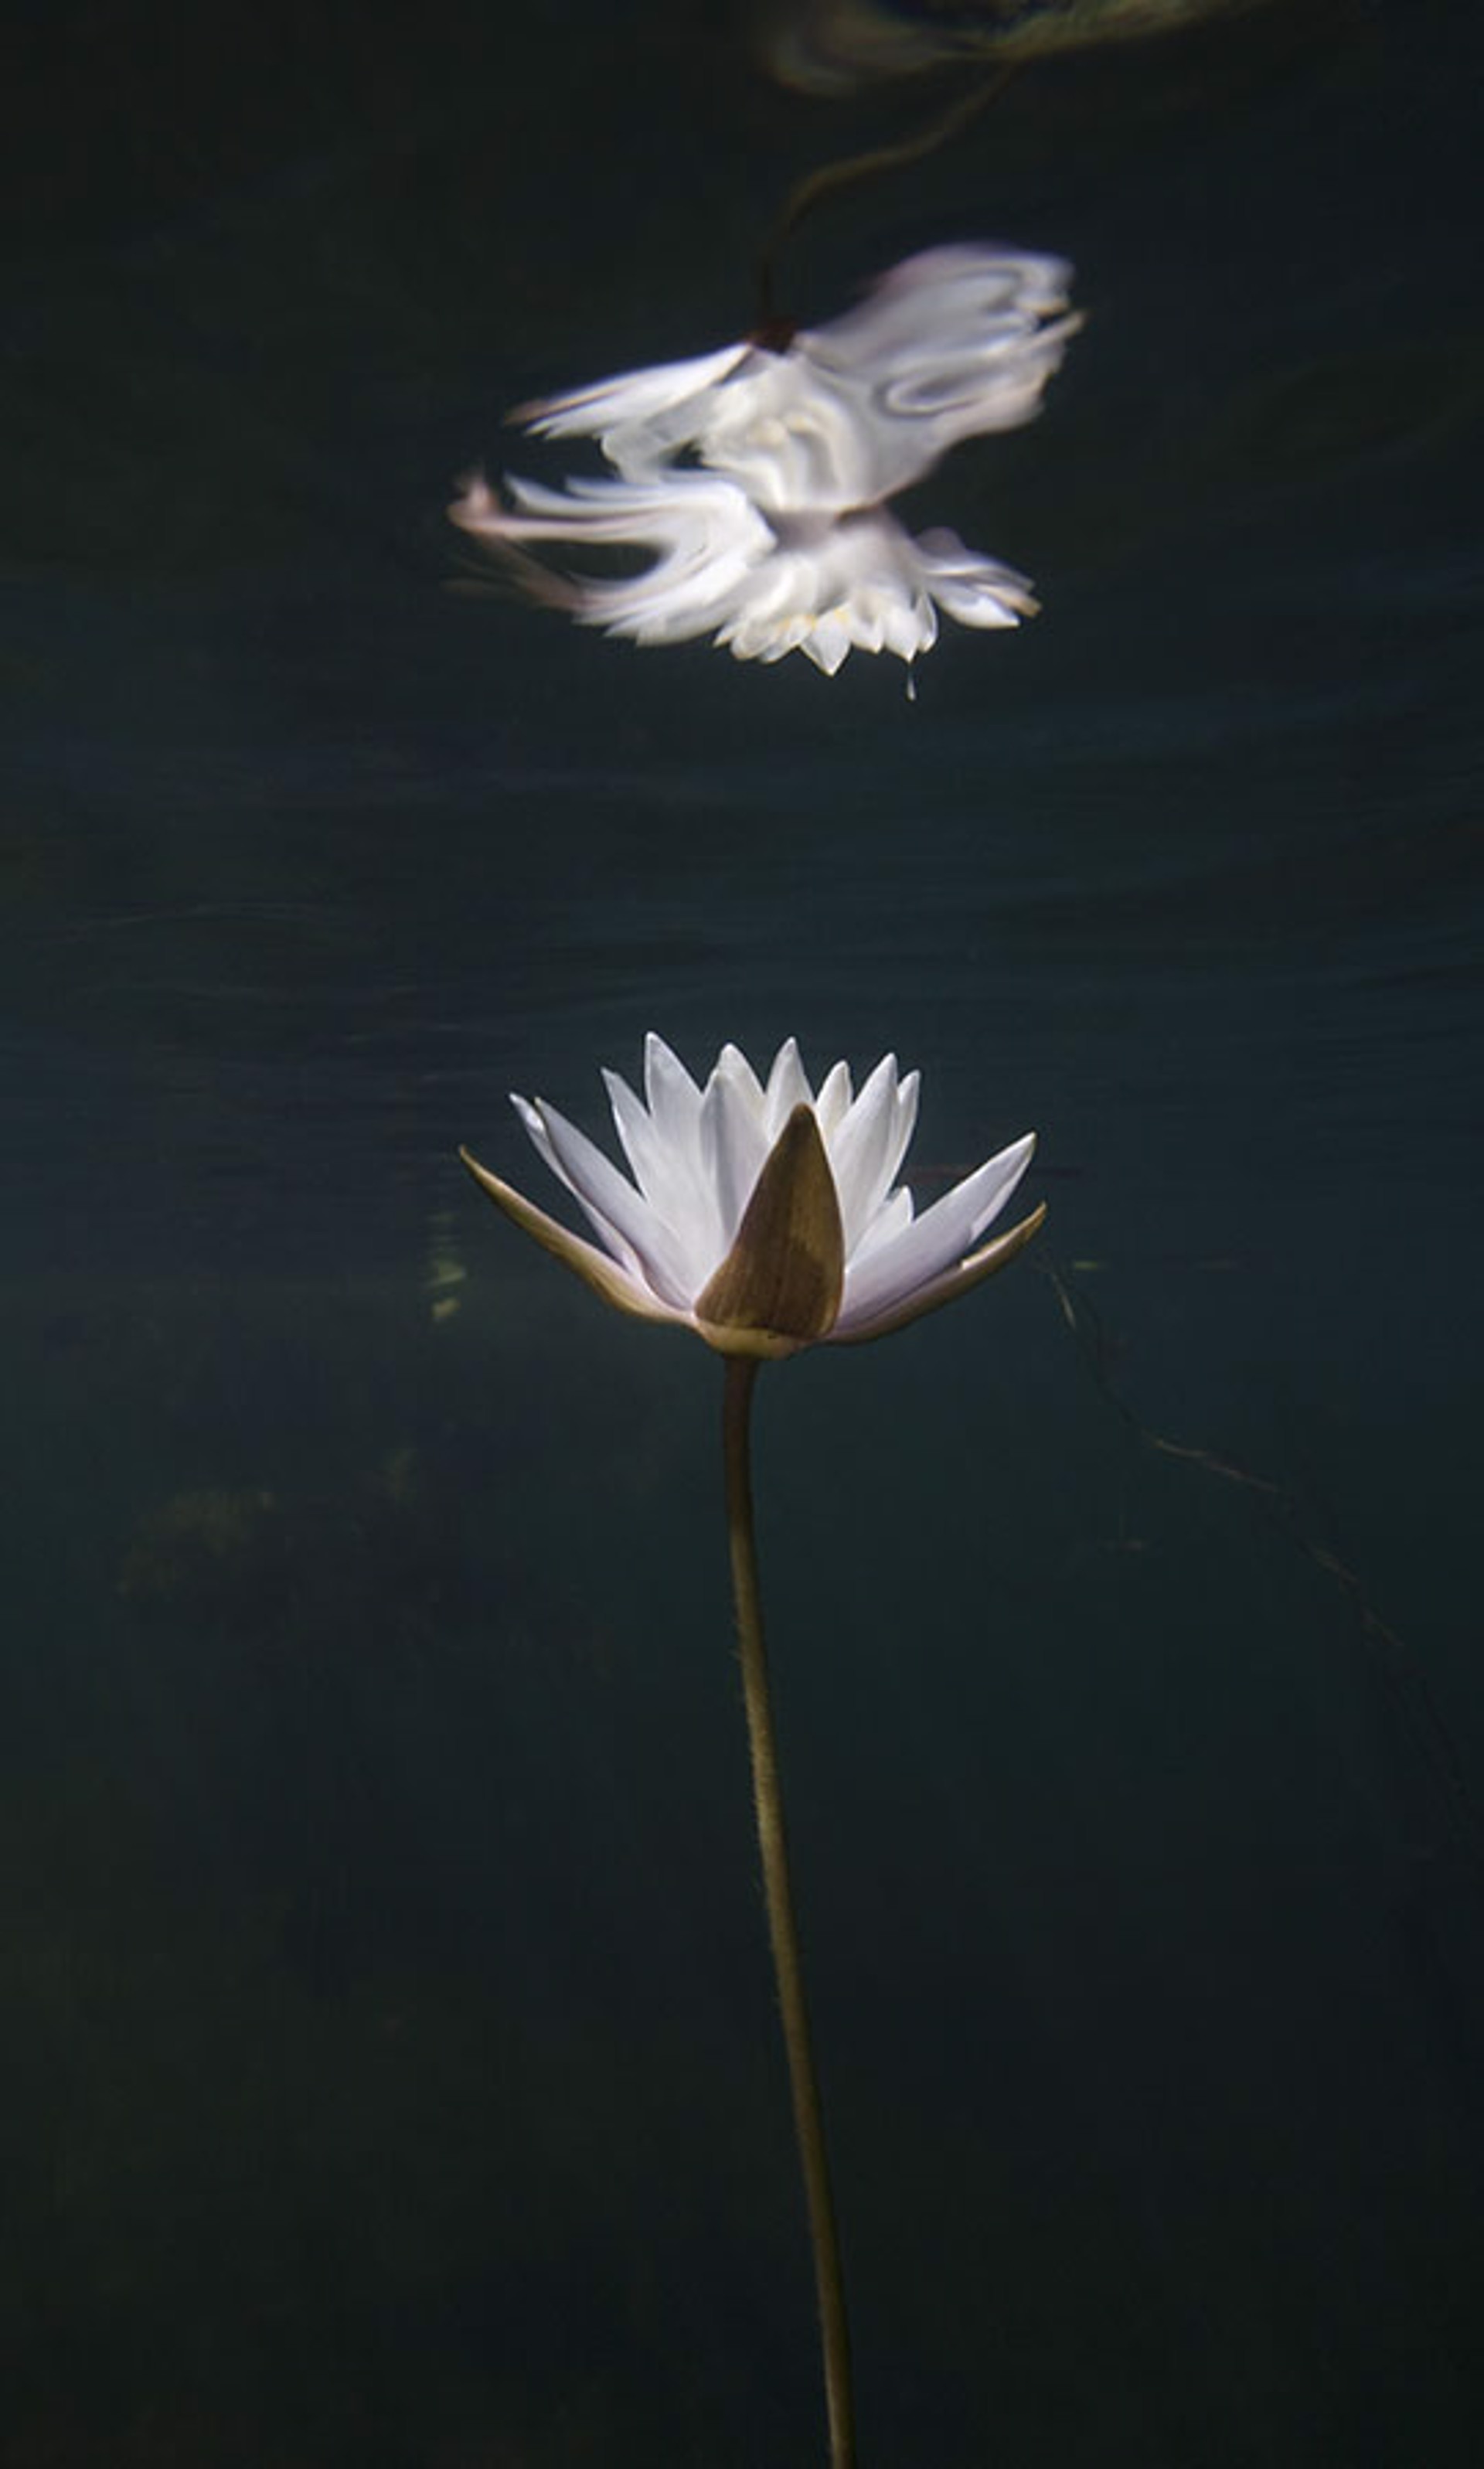 WATER LILY STUDY NO.19 by WILLIAM SCULLY